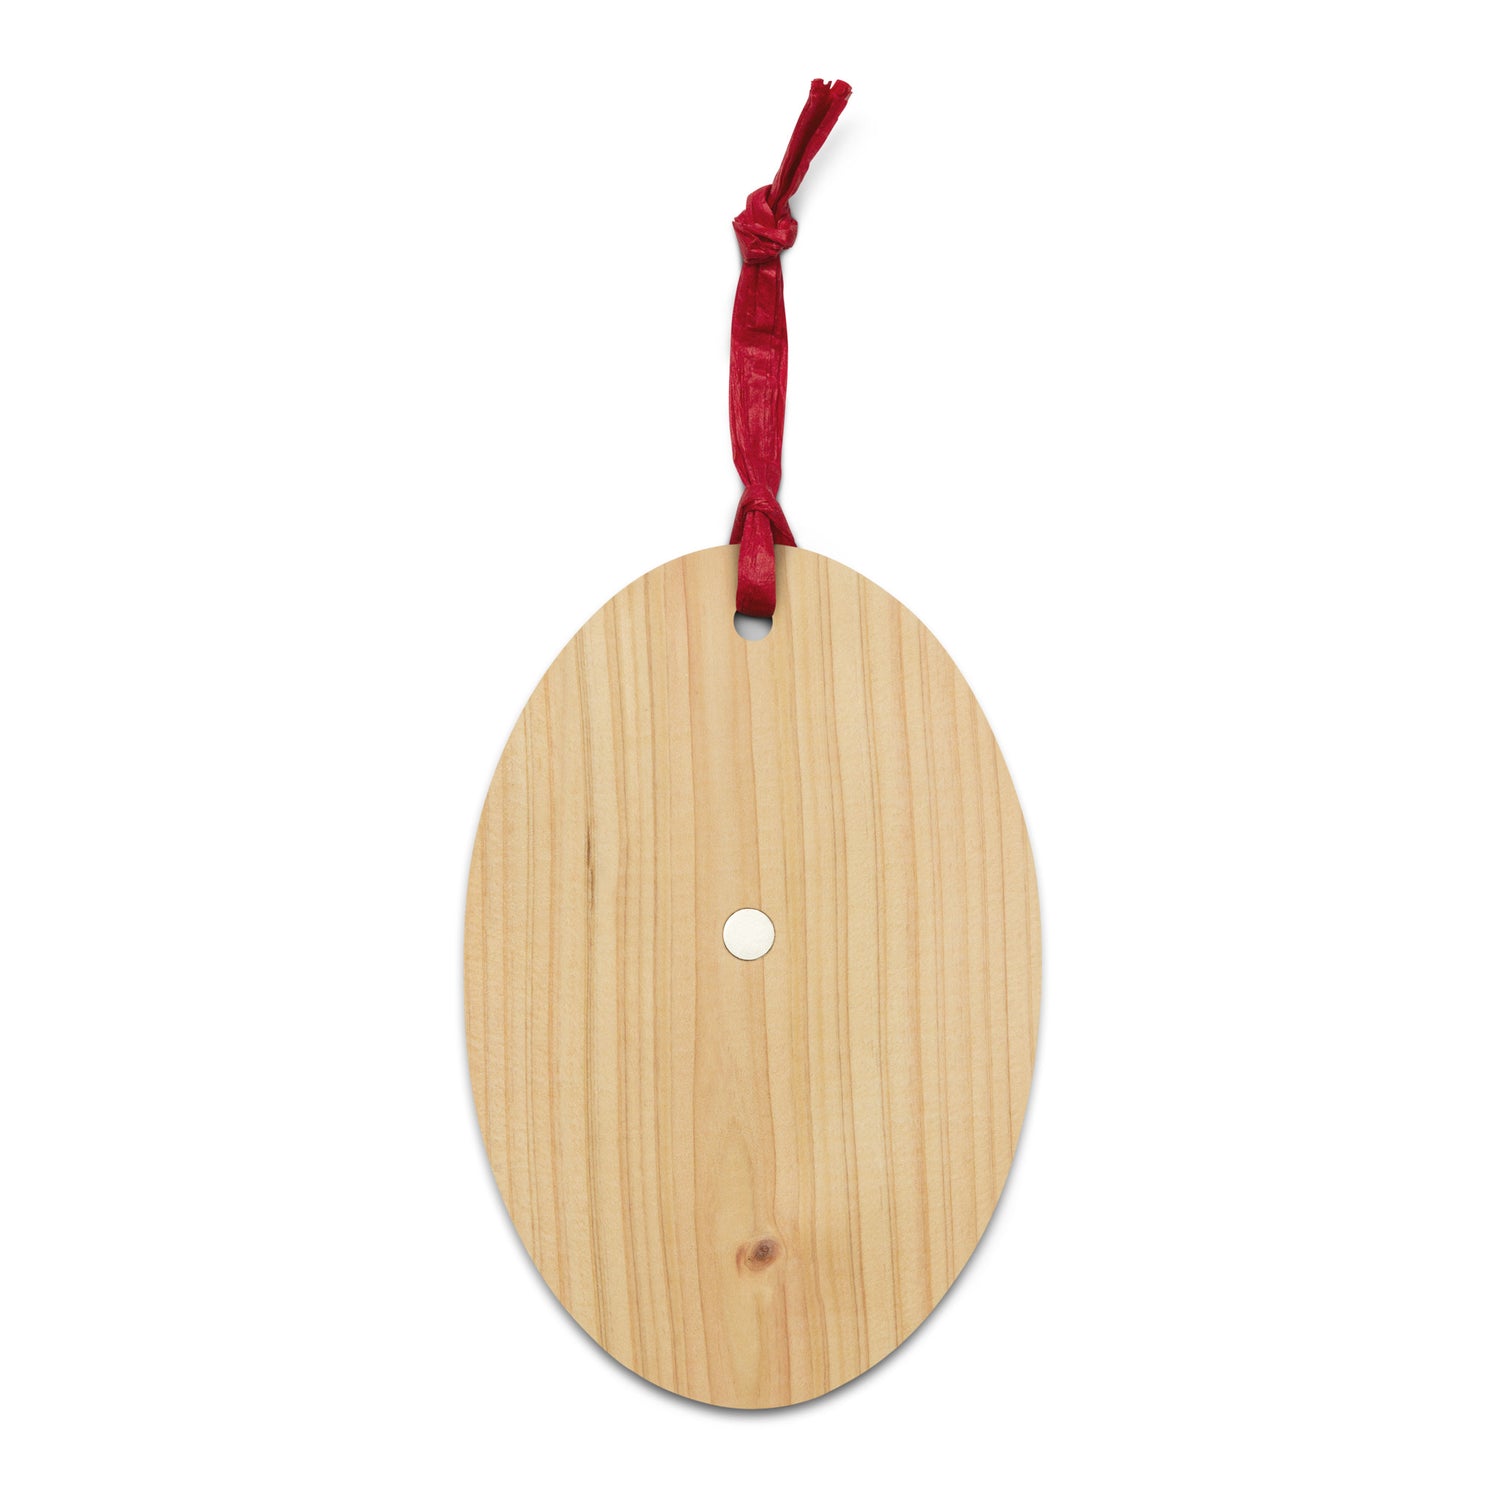 Wooden ornament - Crystal